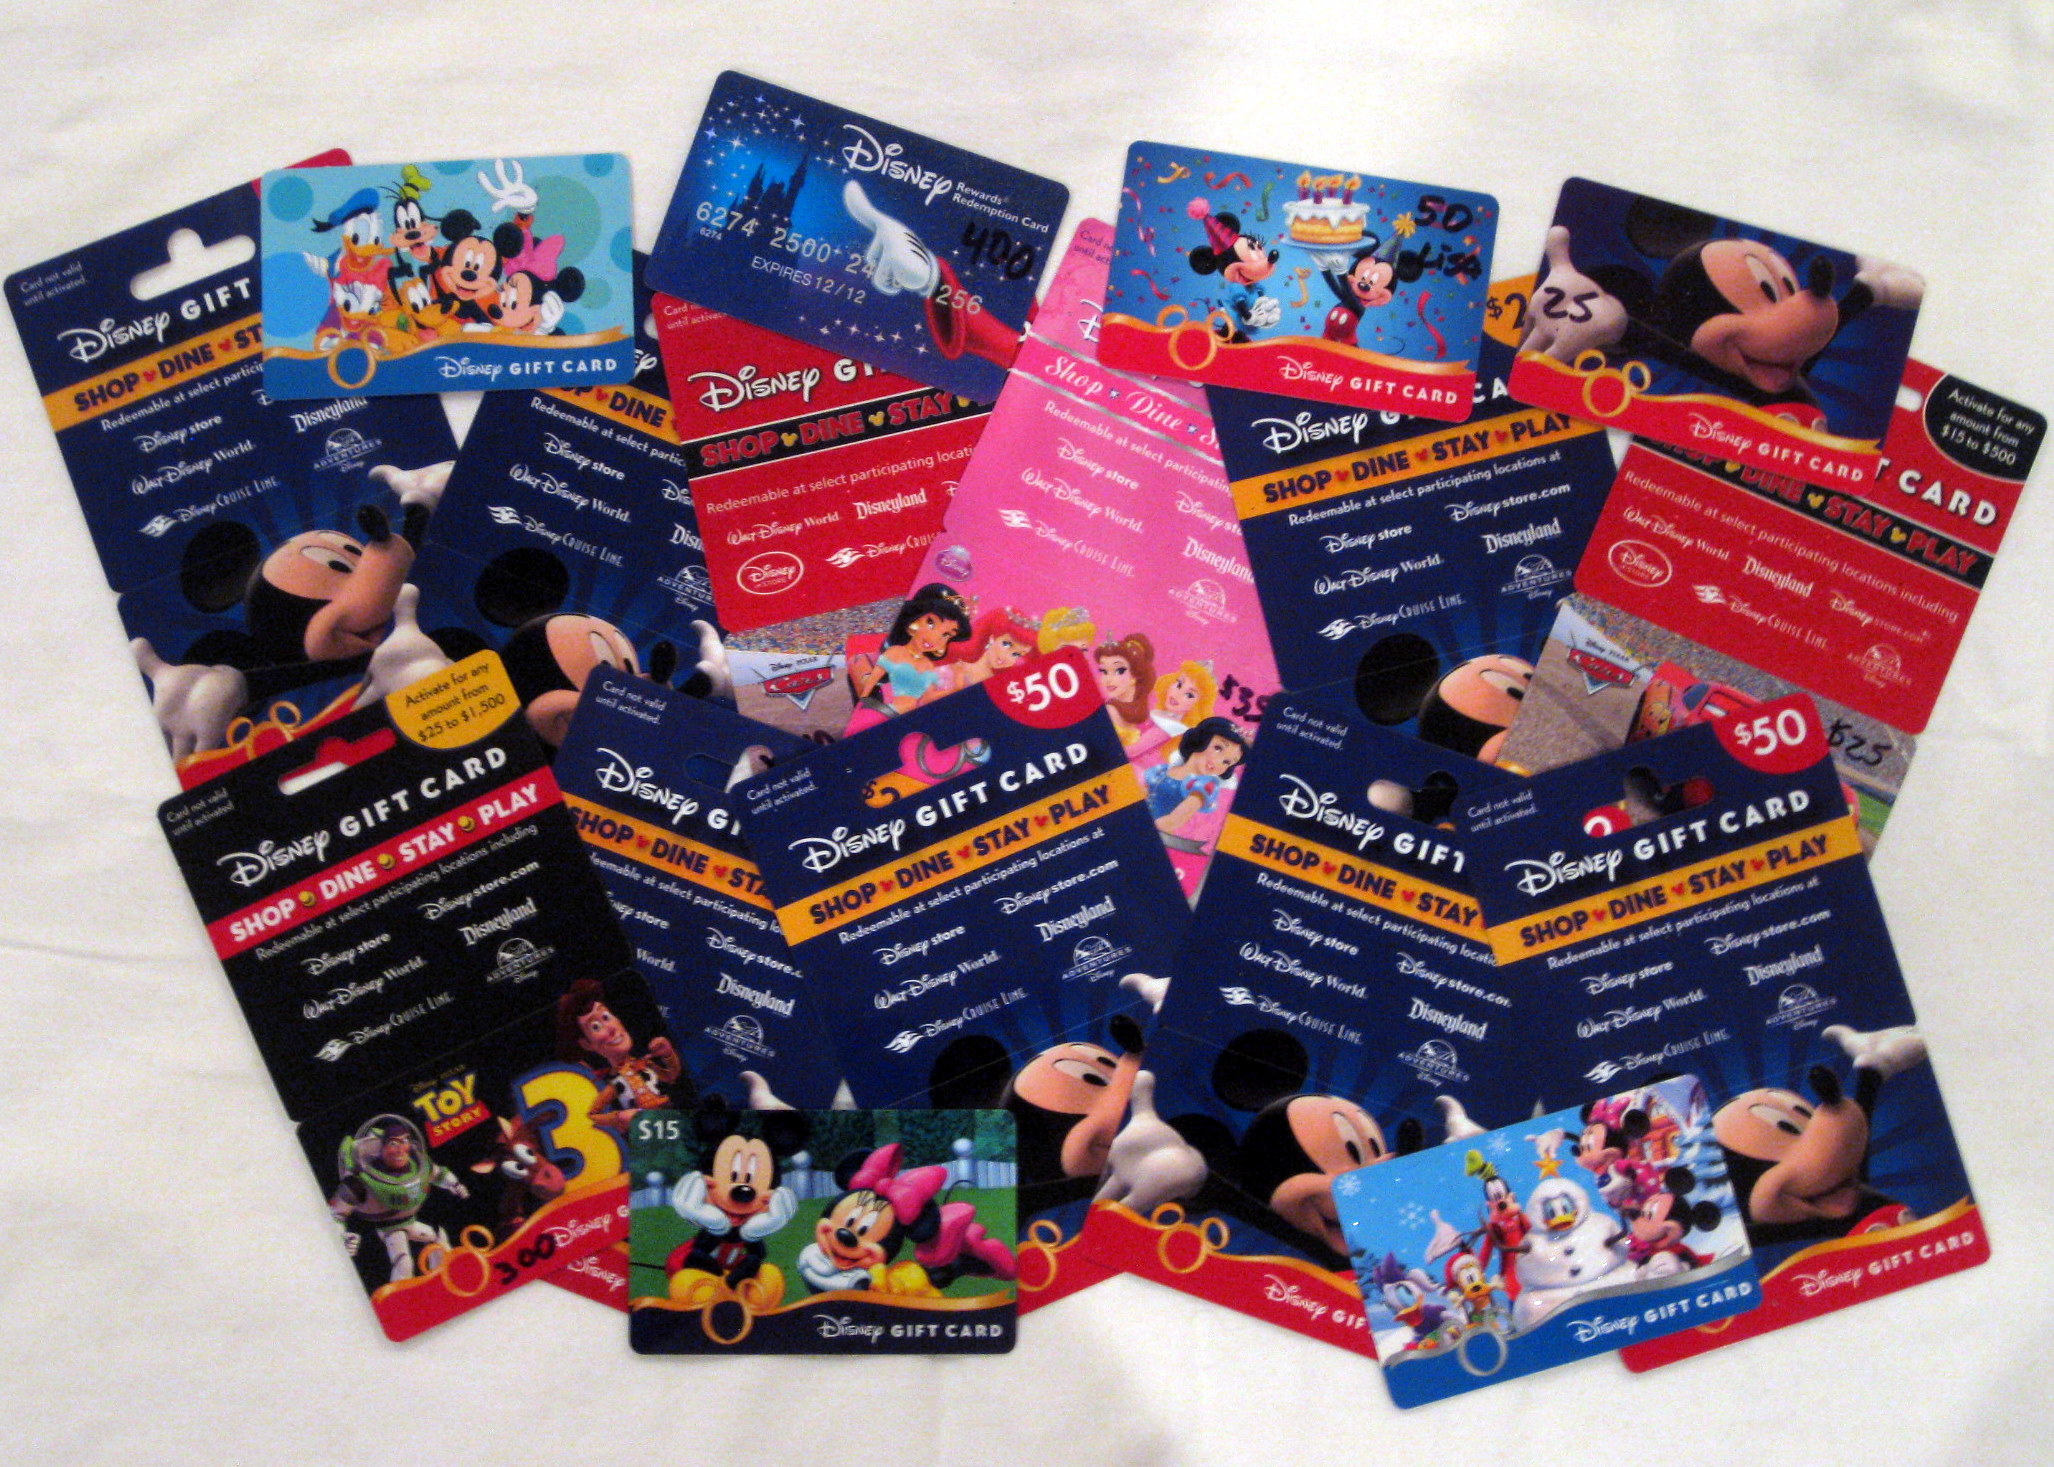 Your Fund: How I saved 30% off my trip by buying Disney gift cards